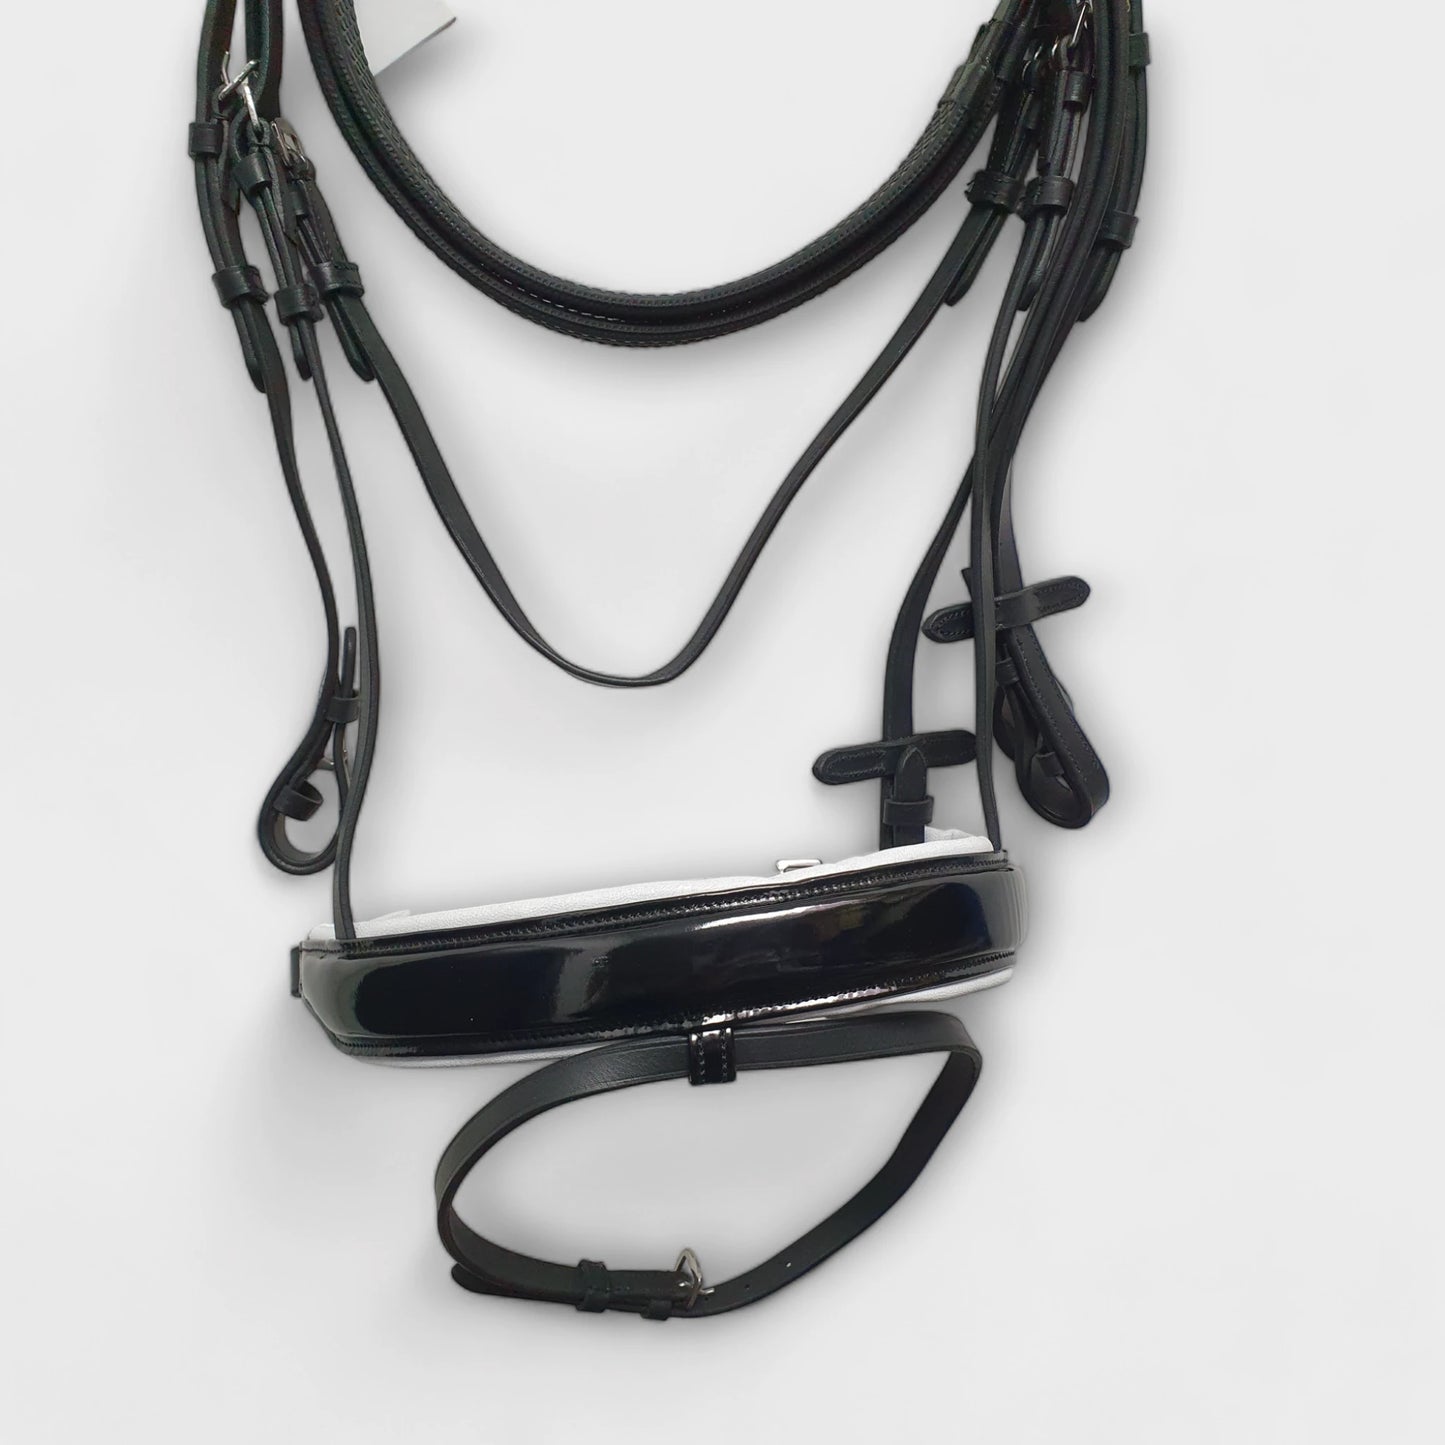 Leather Dressage Bridle Black and White Diamante with Patent Noseband